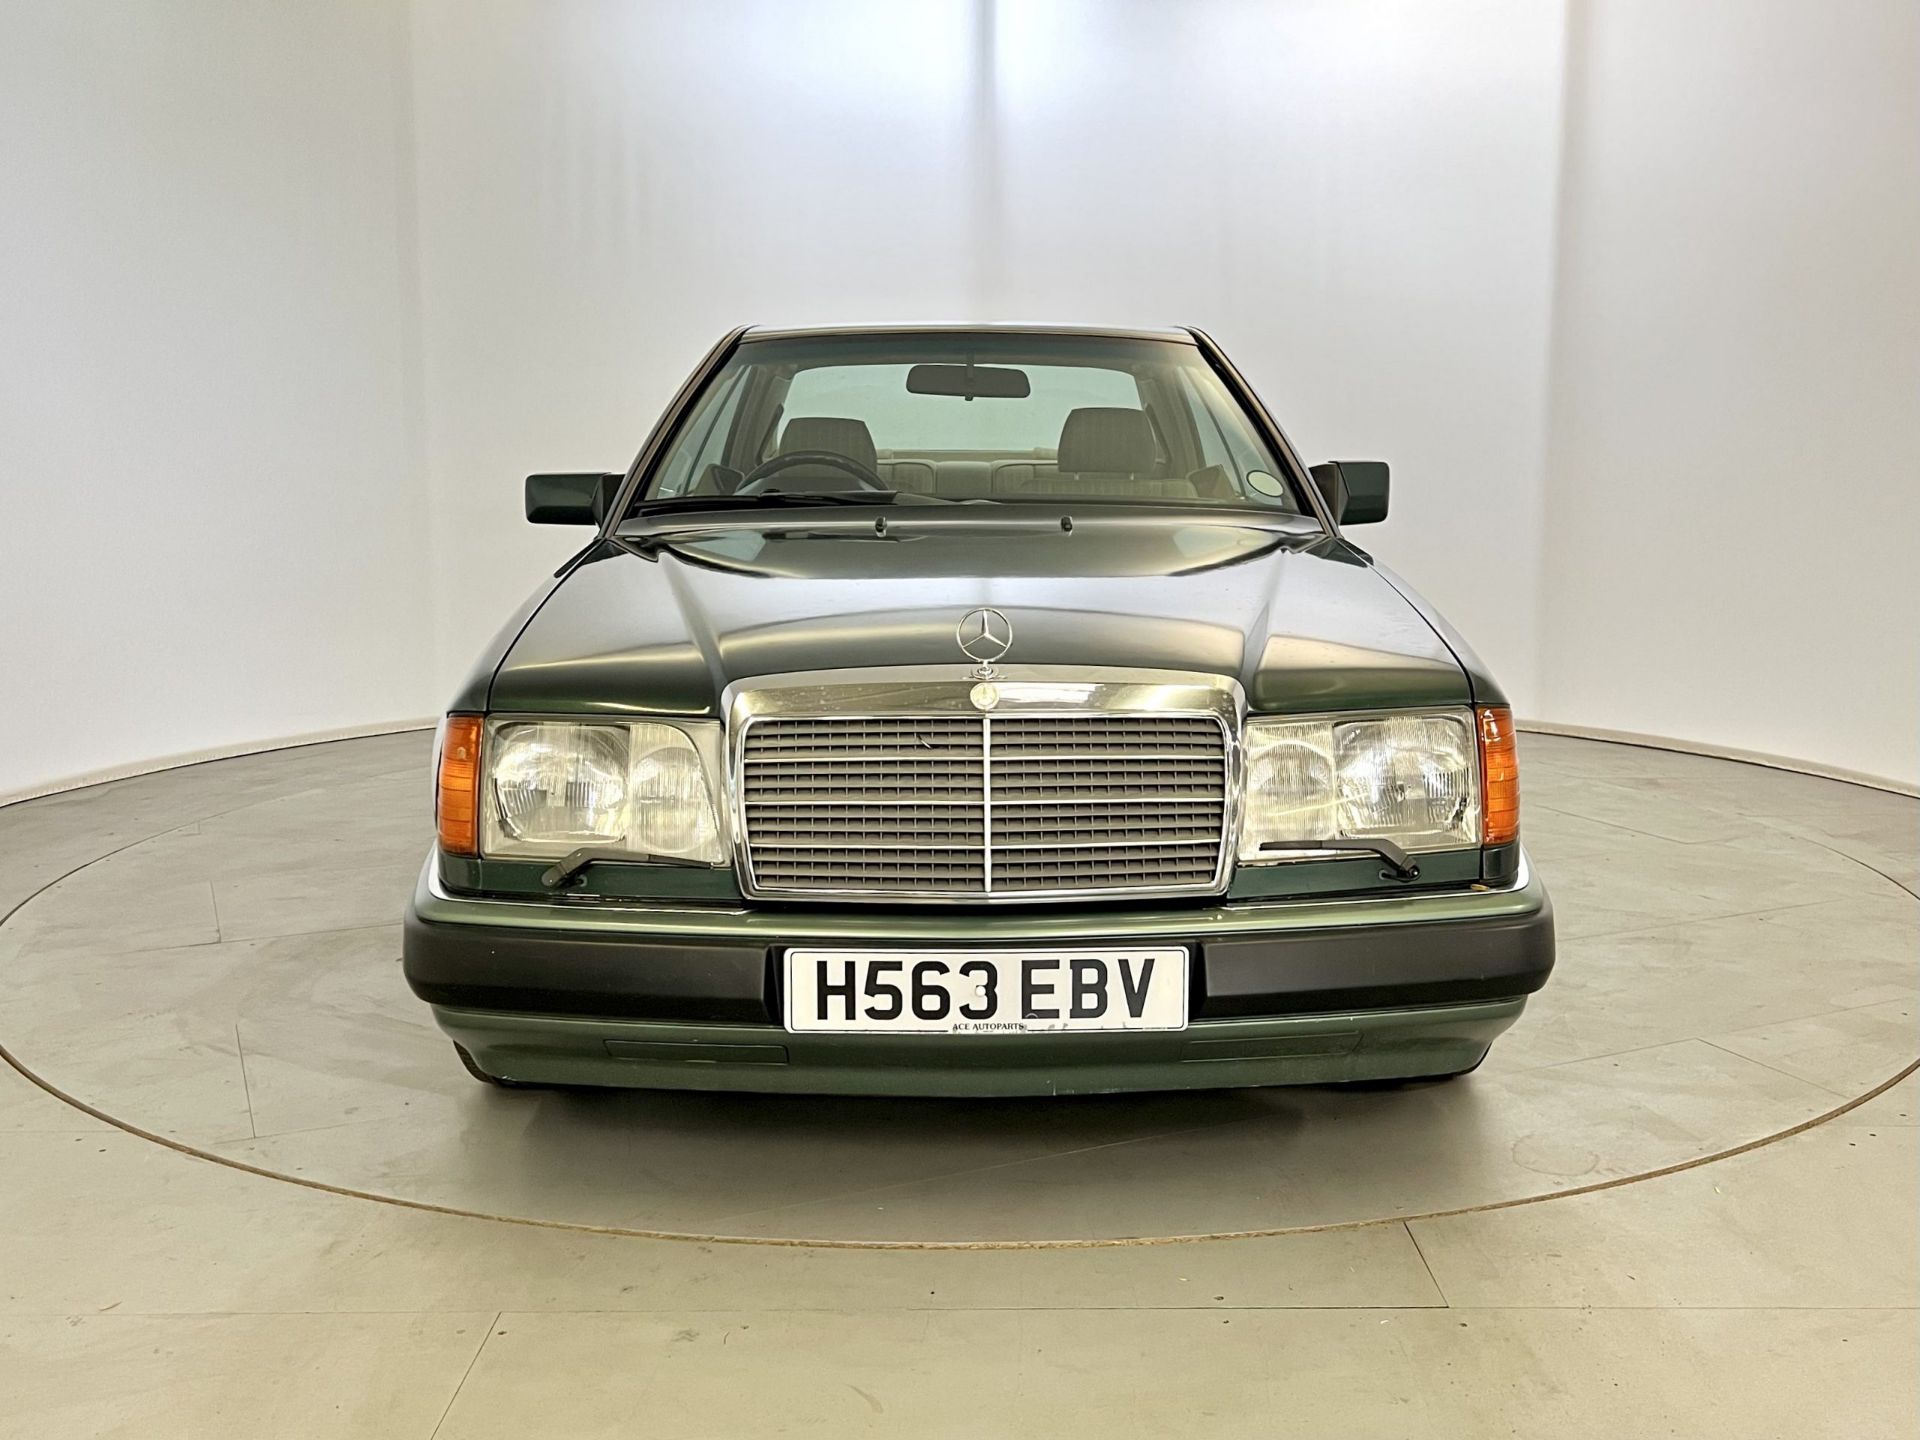 Mercedes 300CE - Image 2 of 30